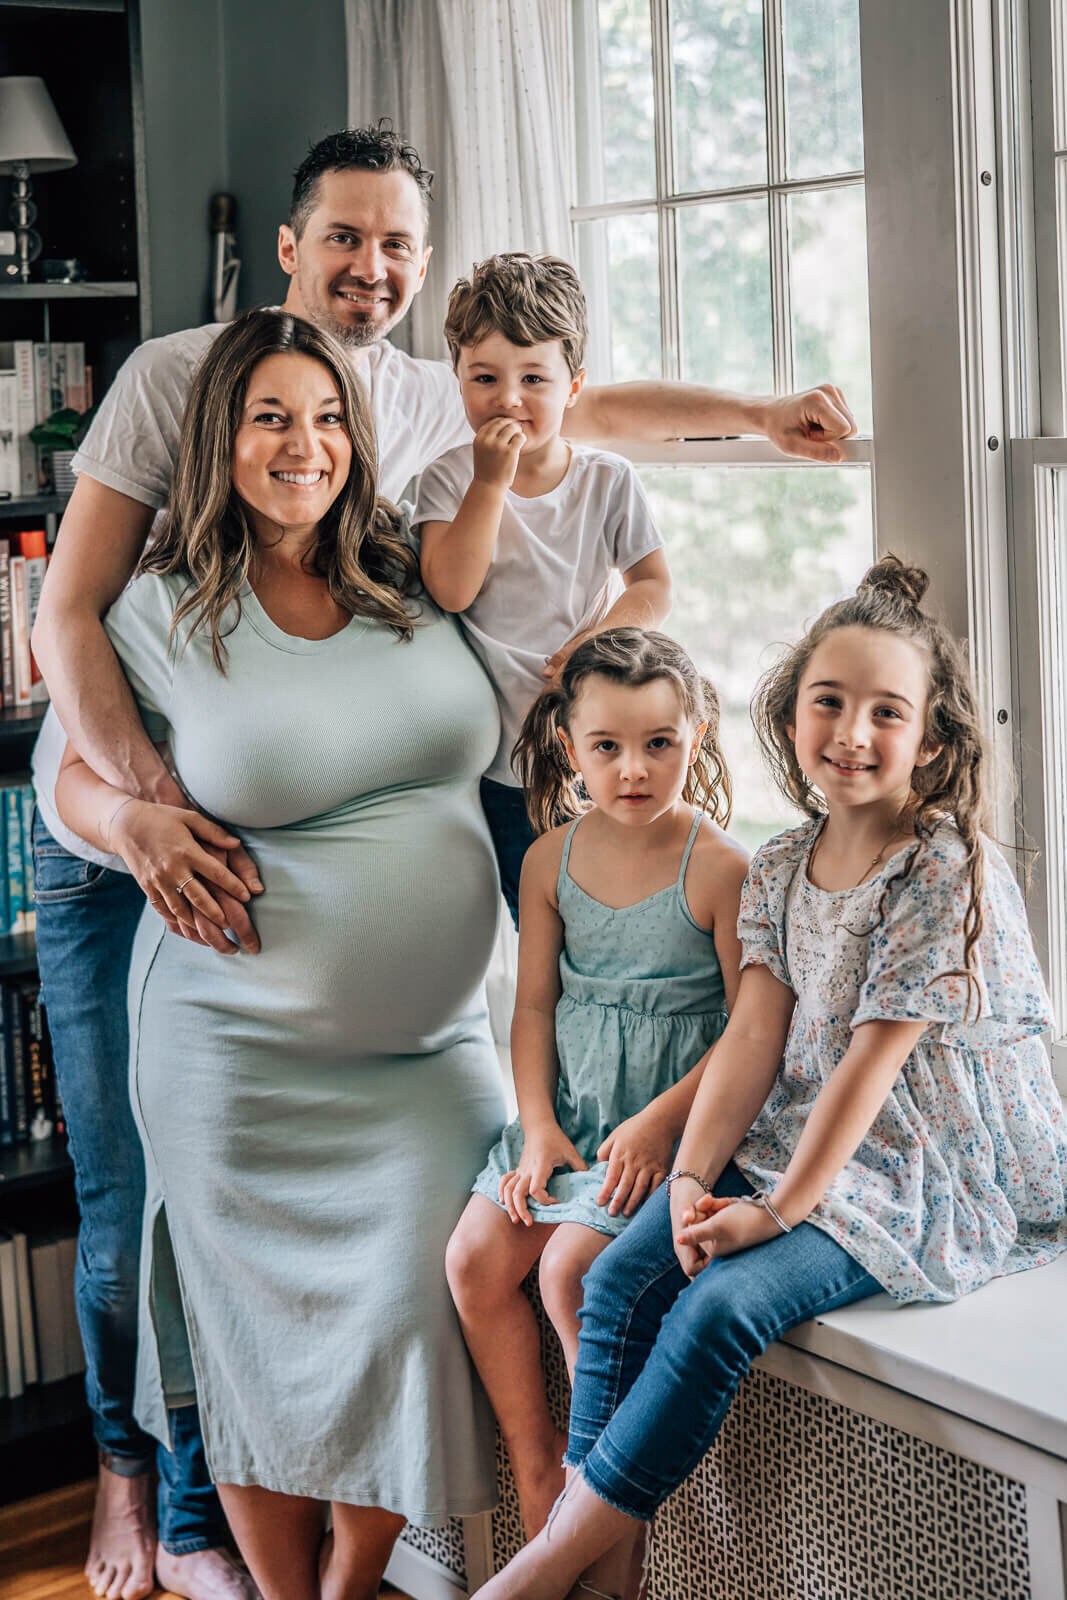 A lifestyle portrait of a large family, soon expecting another child, during a maternity session by Minneapolis lifestyle photographer, Kate Simpson.